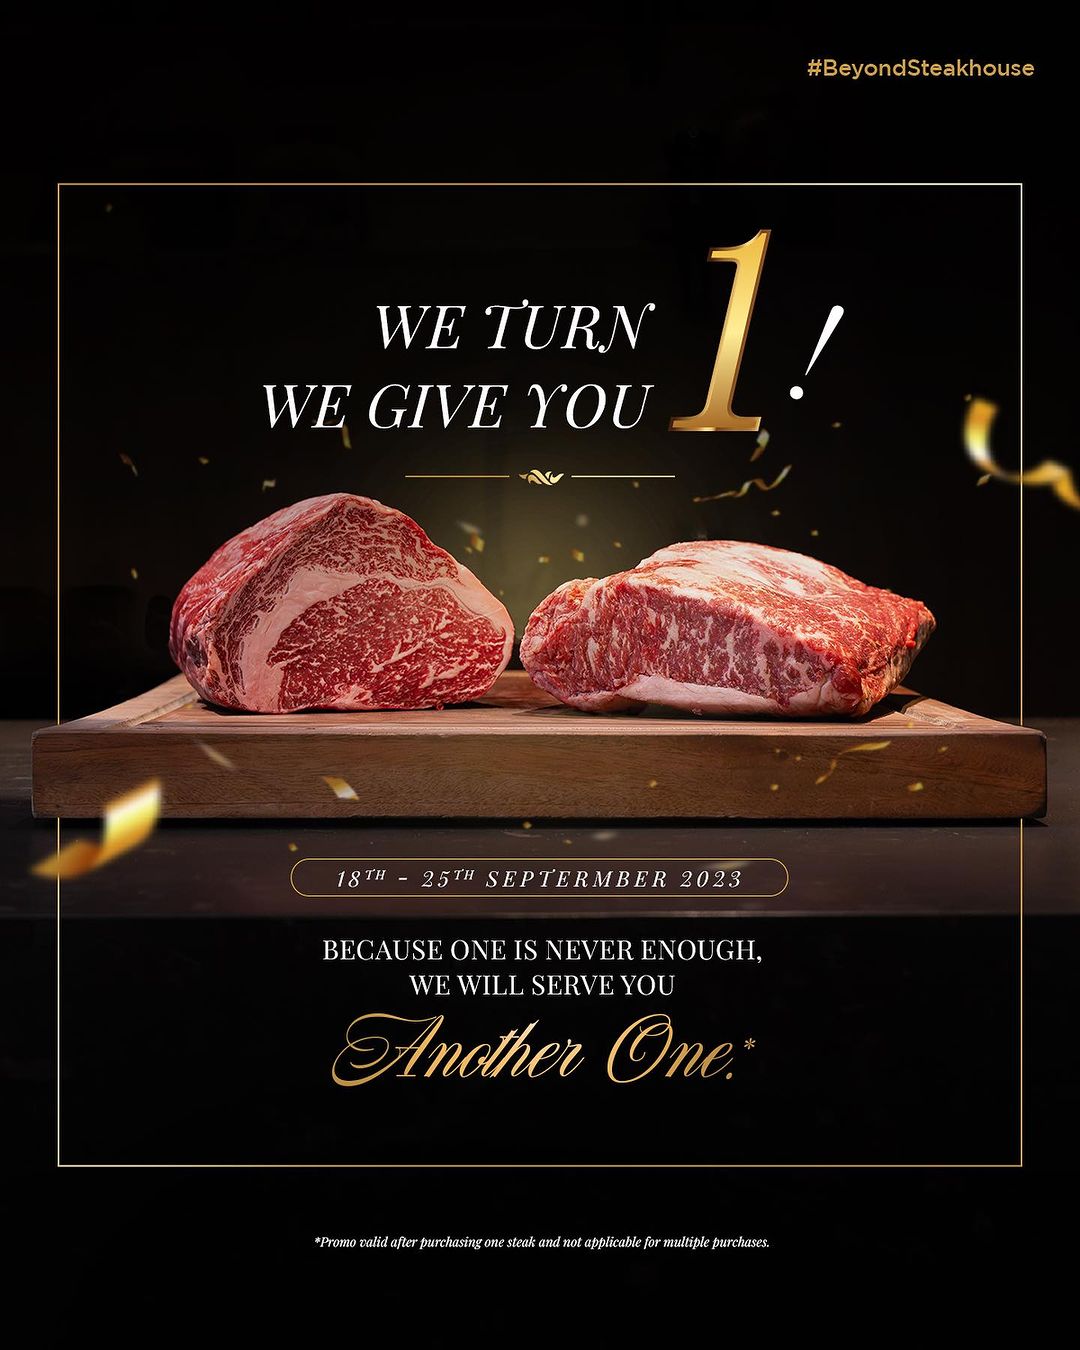 Meatguy Steakhouse's First Anniversary: 'We Turn 1, We Give You 1!